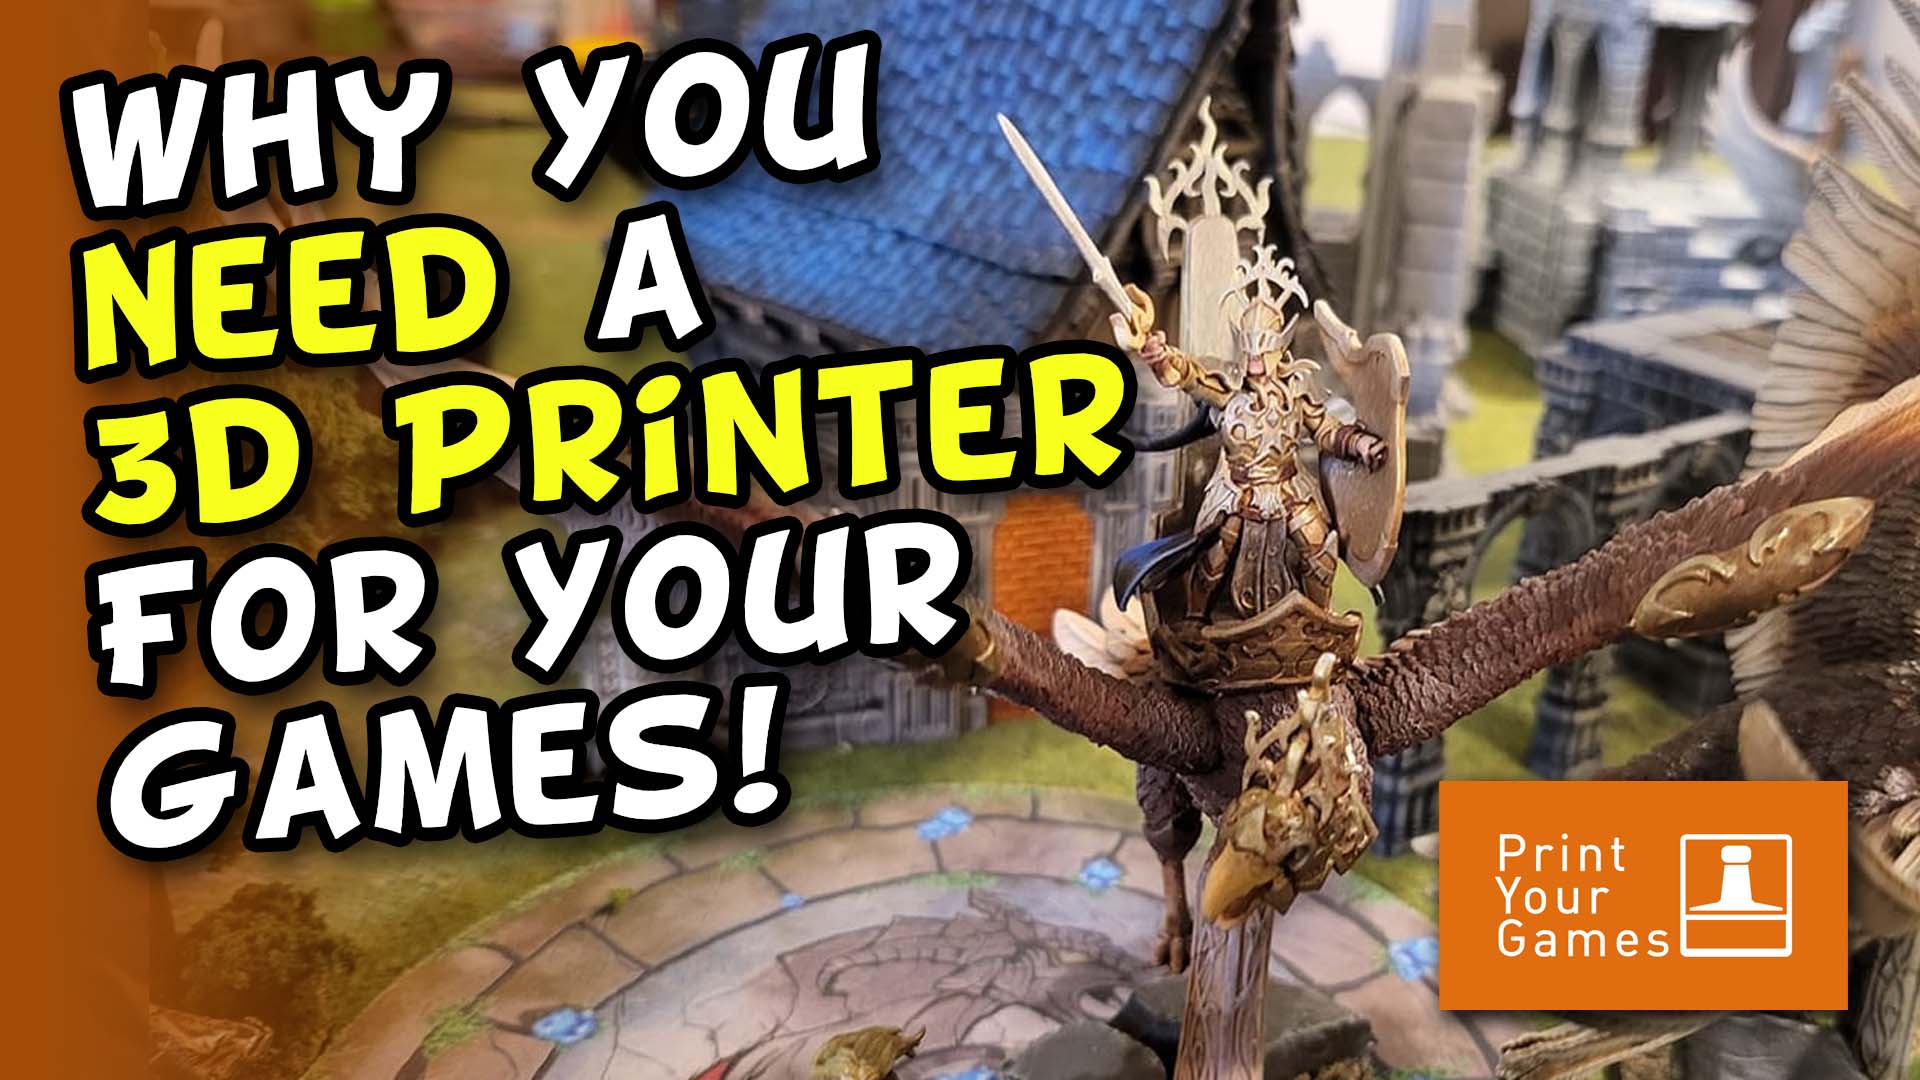 Why You Need a 3d Printer for Your Games